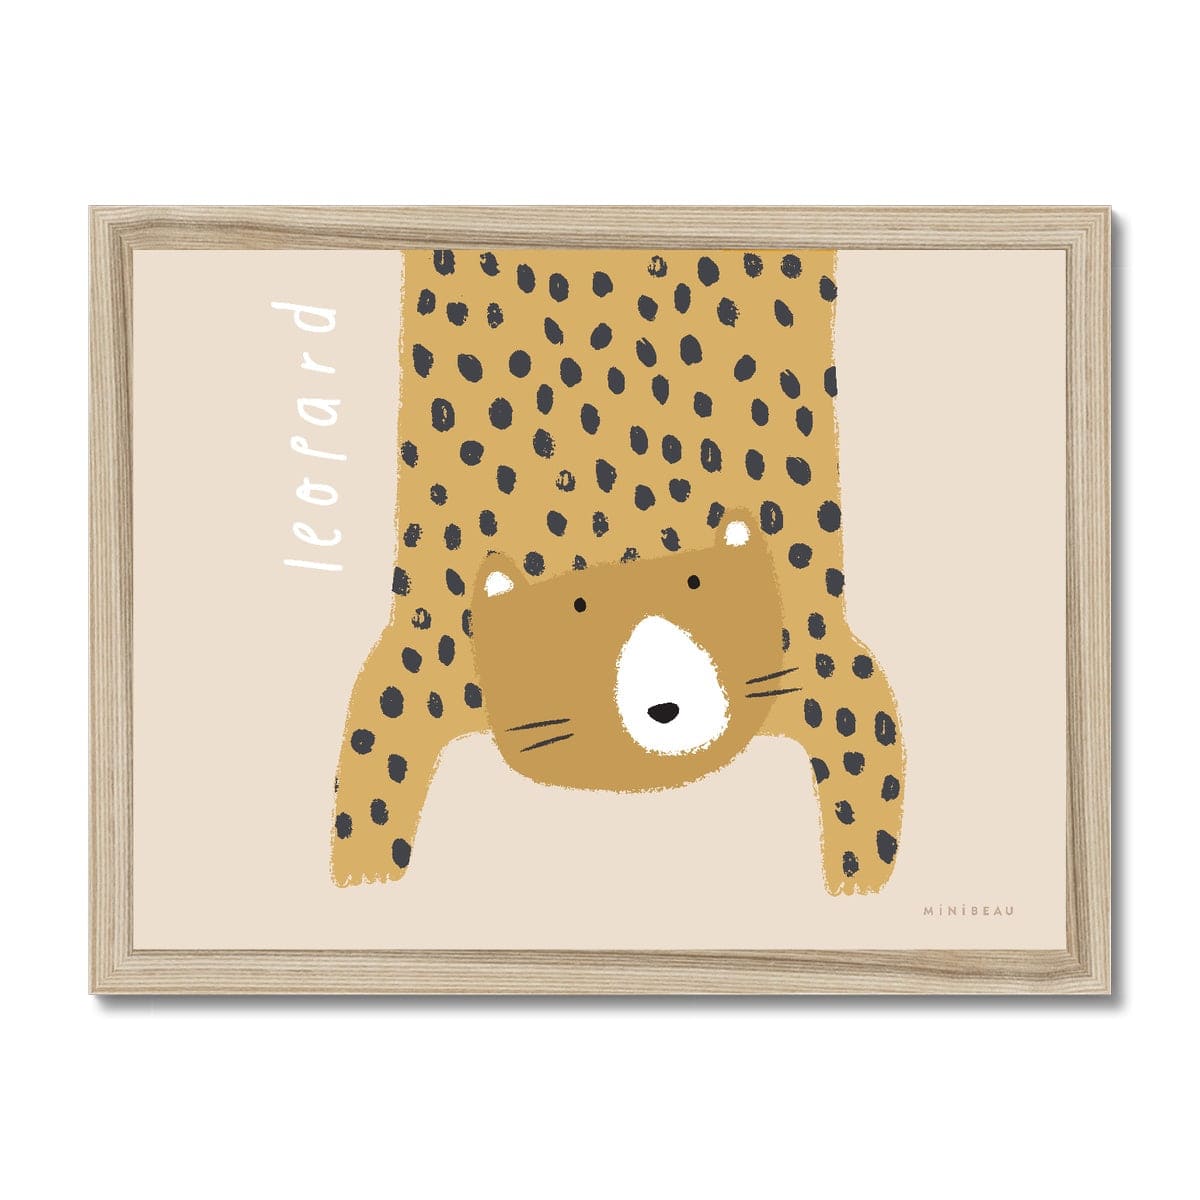 Our Leopard art print shows a hand-drawn leopard hanging down in to the picture, lifting it's head to look out at us on a beige background, with the word leopard written alongside it, in a natural wooden frame.